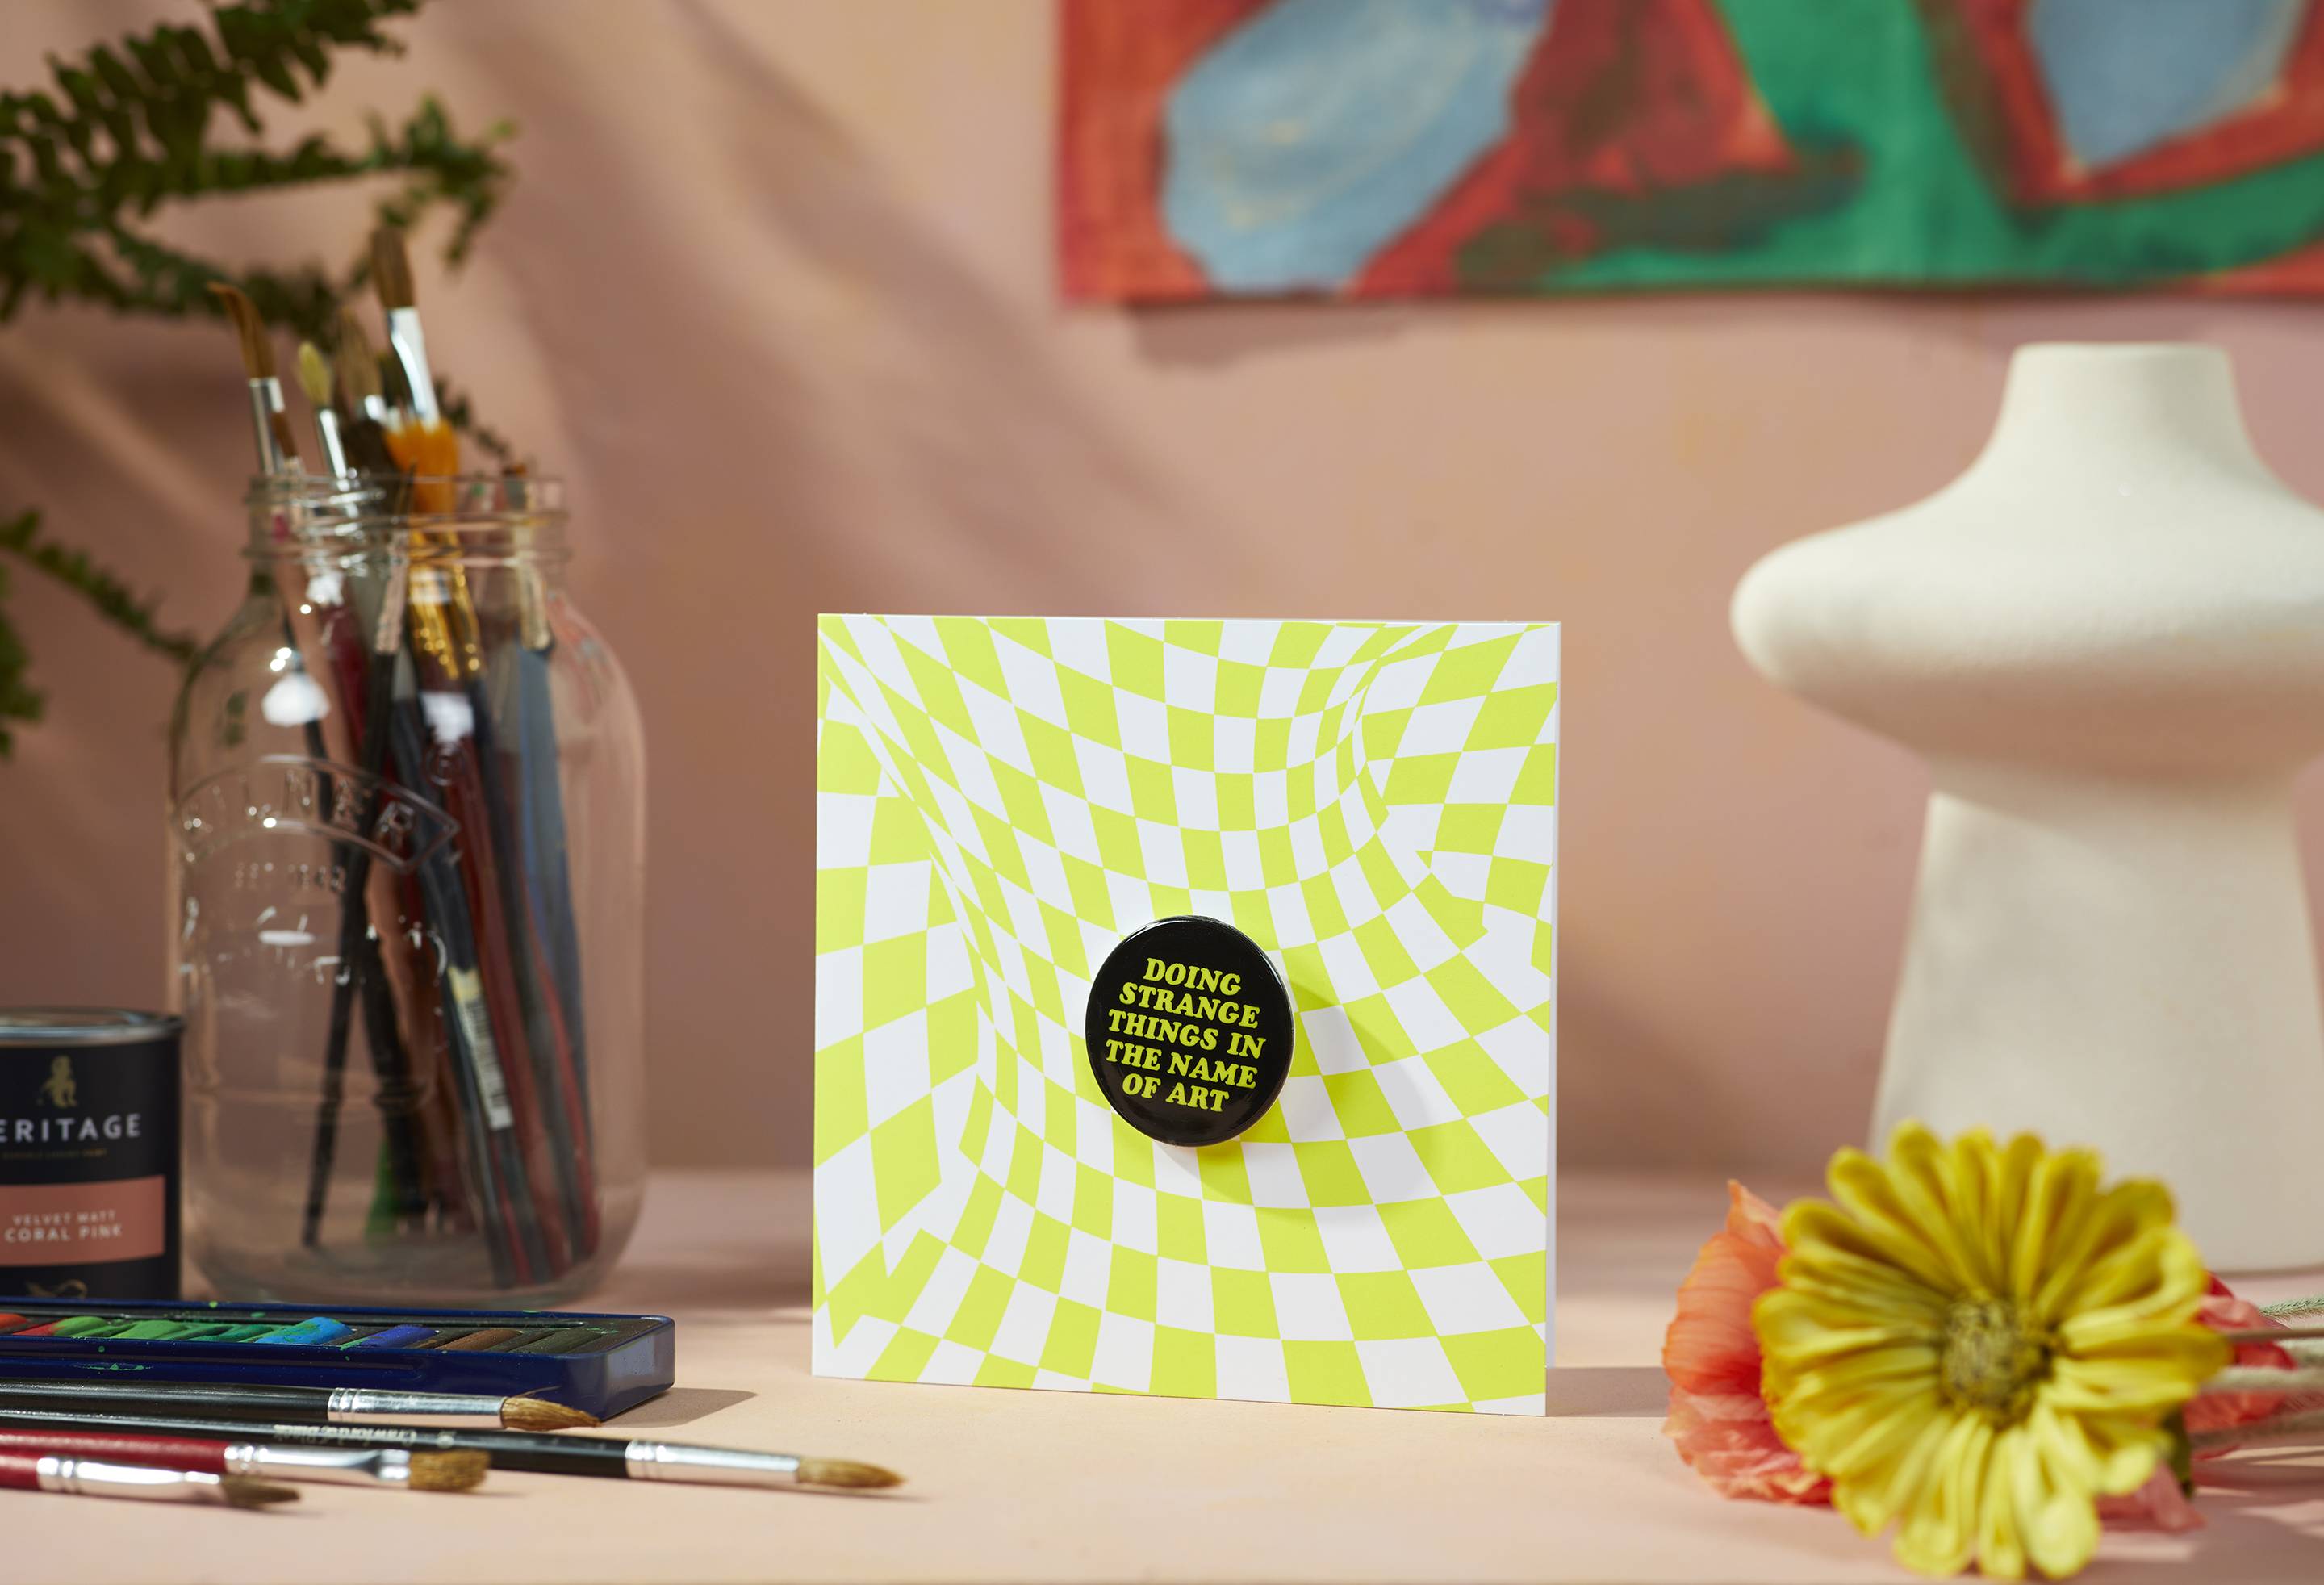 The funky-patterned greetings card is sitting on a pastel table surrounded by a sculpture, flowers and a multitude of paintbrushes.